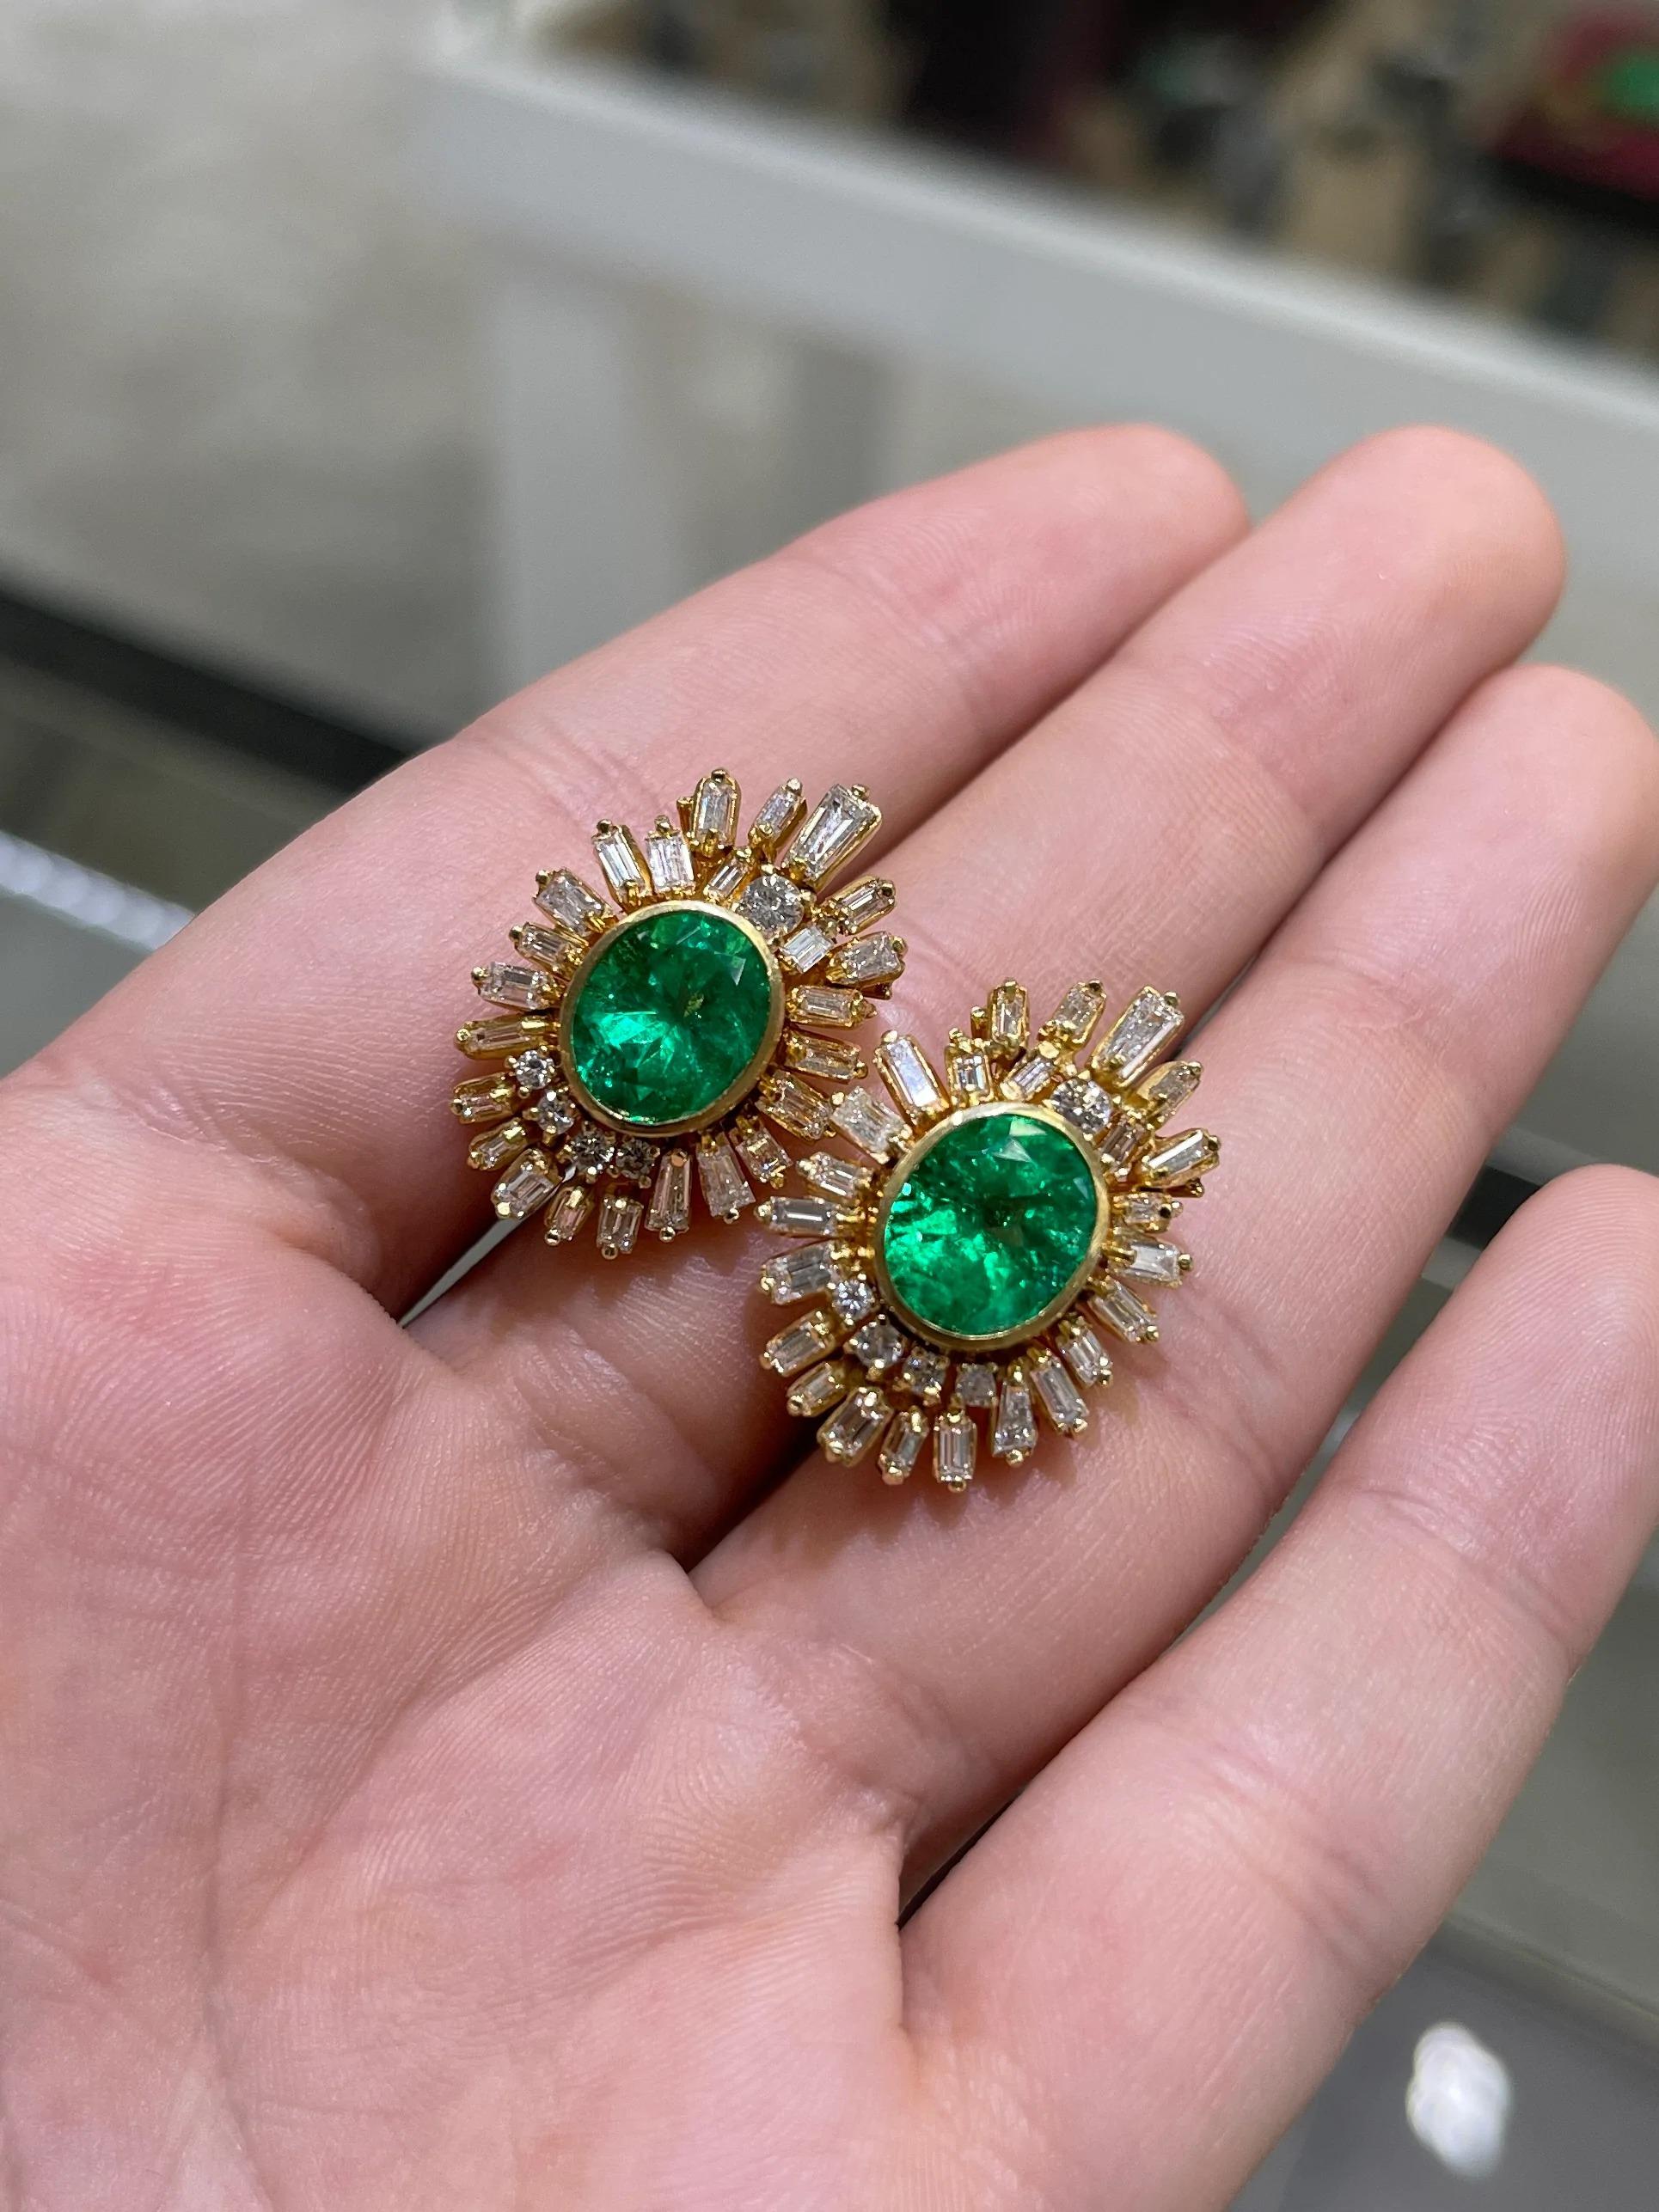 One-of-a-kind, bespoke, Colombian emerald & Diamond Omega stud earrings. These impressive earrings feature, fine quality, natural oval emeralds that are bezel set in 18K yellow gold. The emeralds showcase an incandescent vibrancy and simply glow